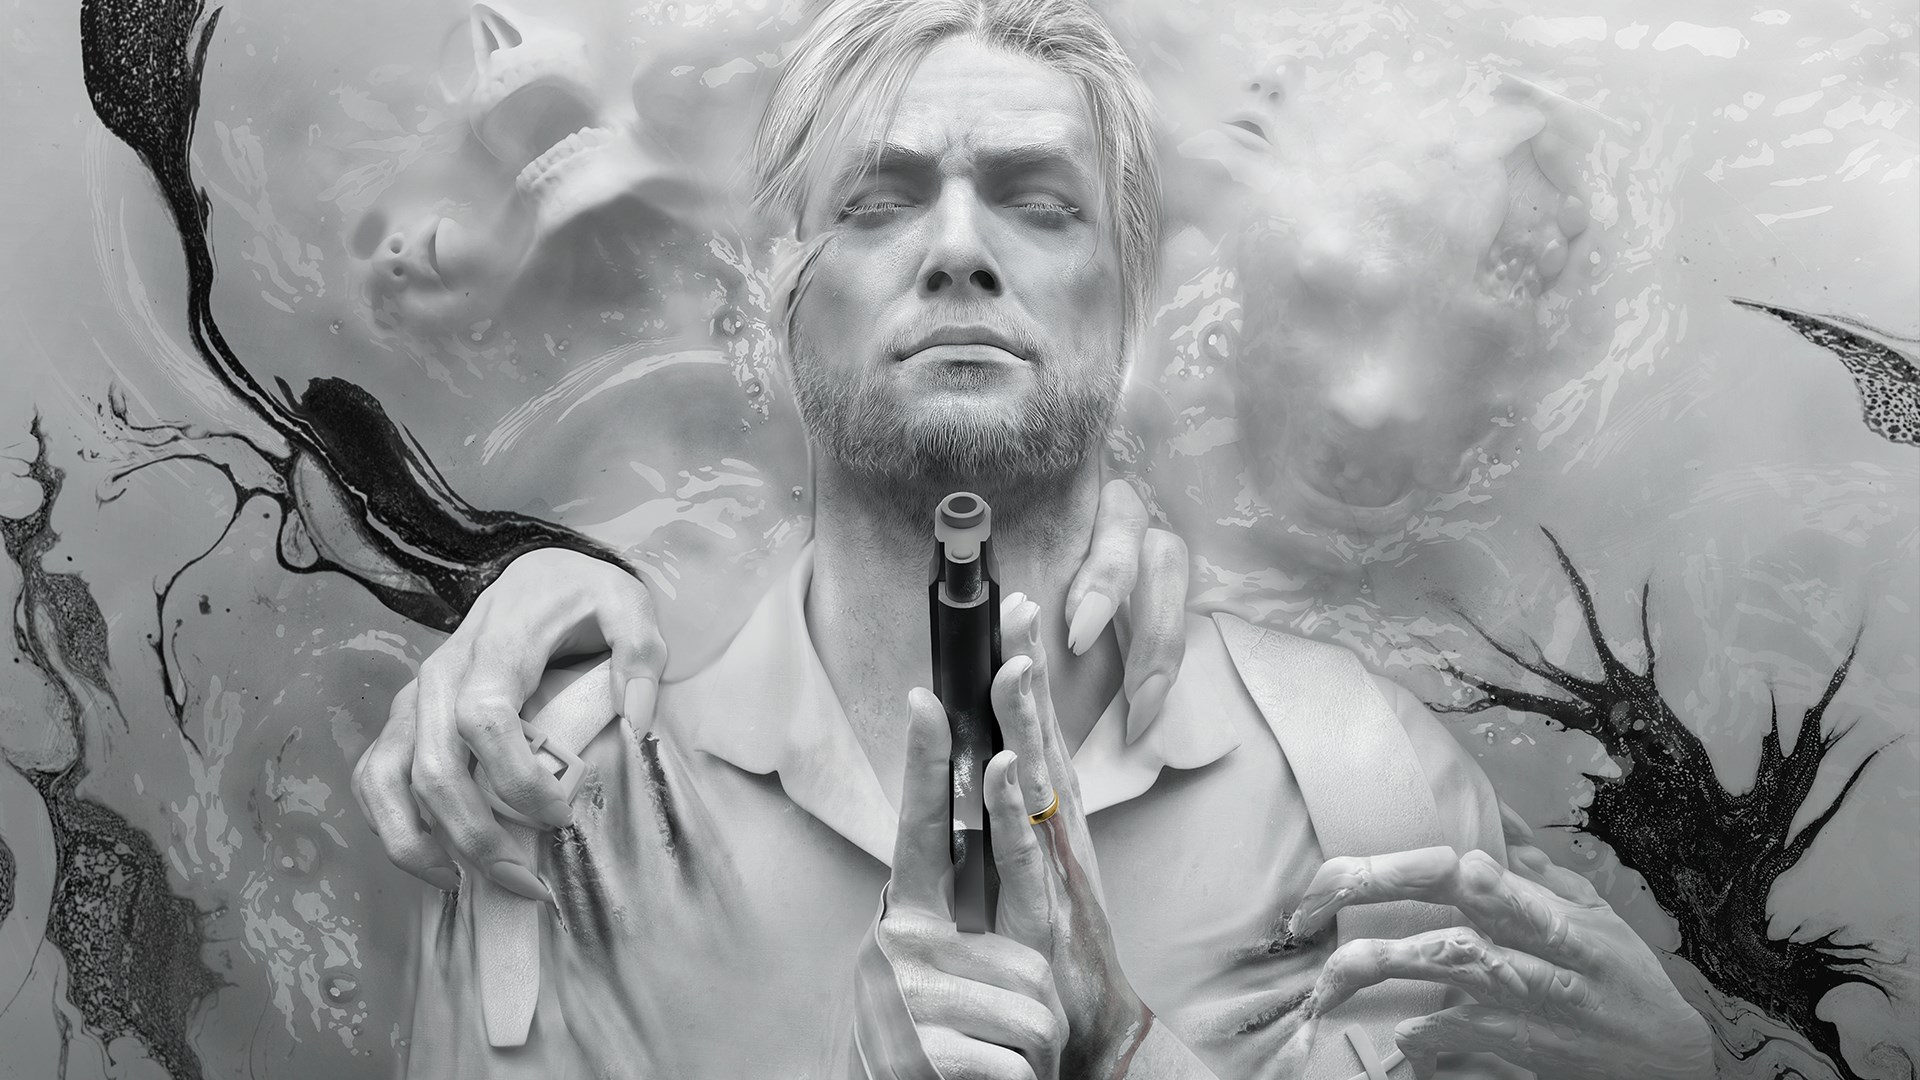 the evil within 2 xbox store